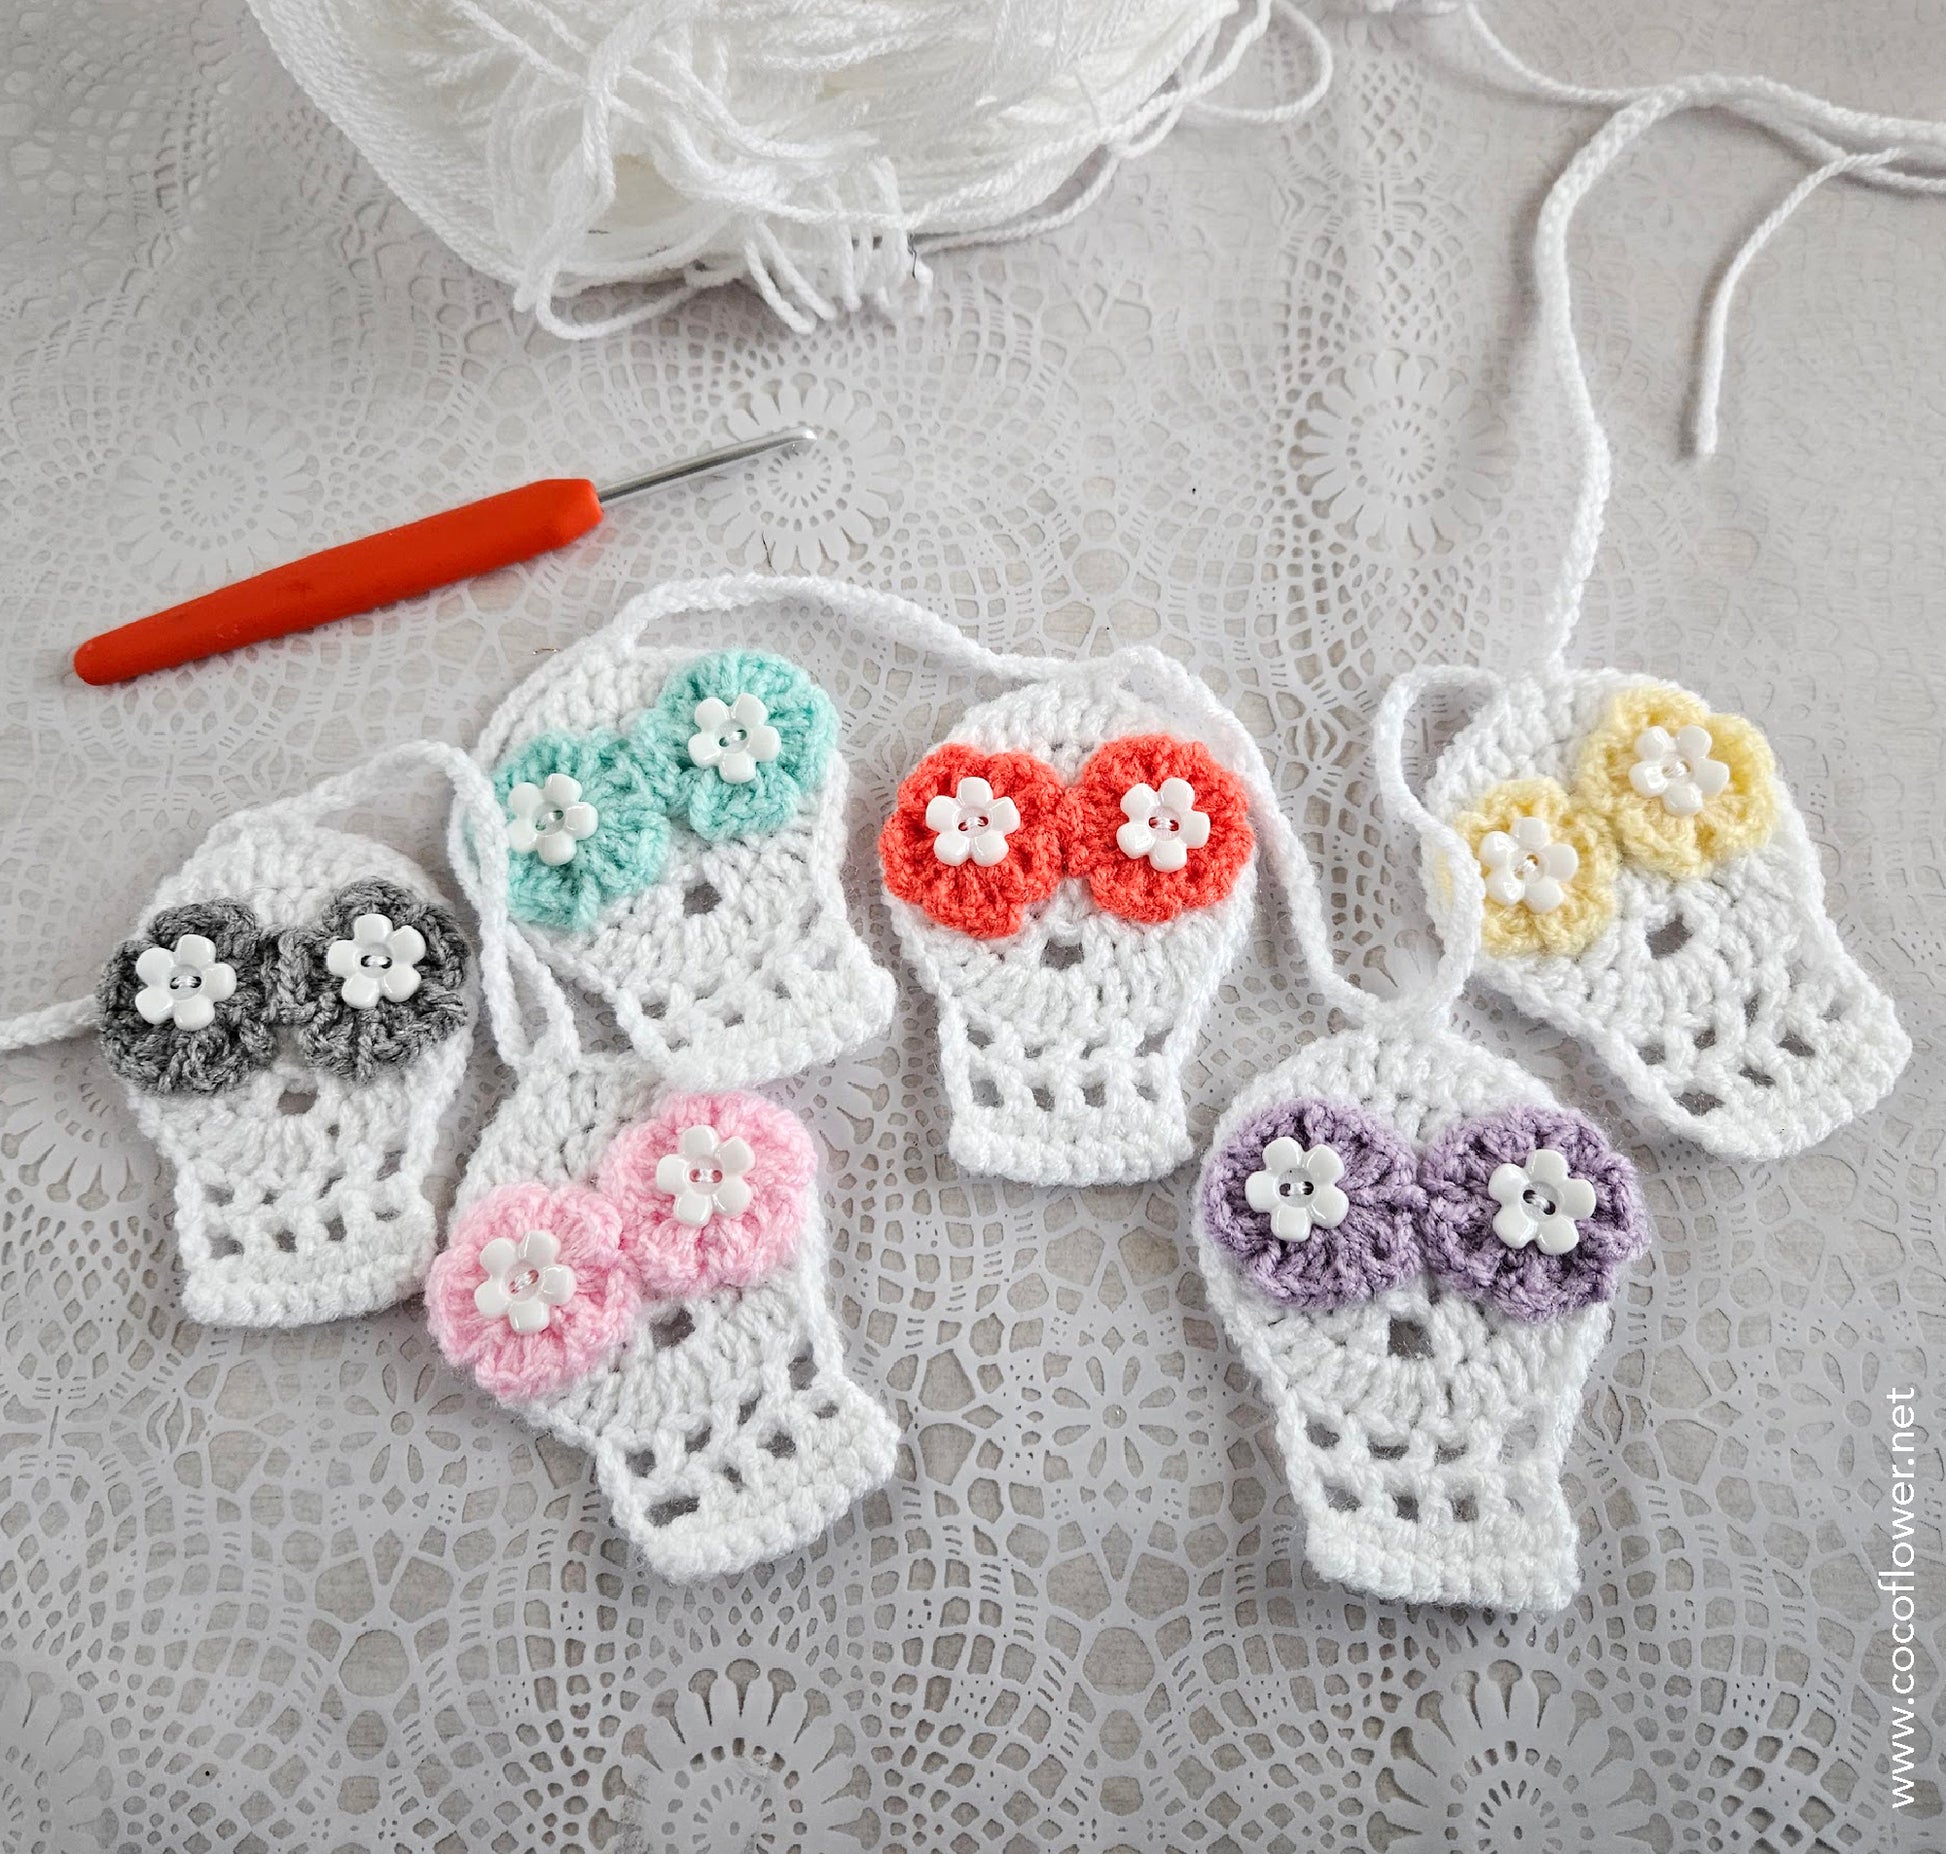 Transform any room into a haven of rock and alternative vibes with our Sugar Skull Garland, a symbol of rebellion and creativity.